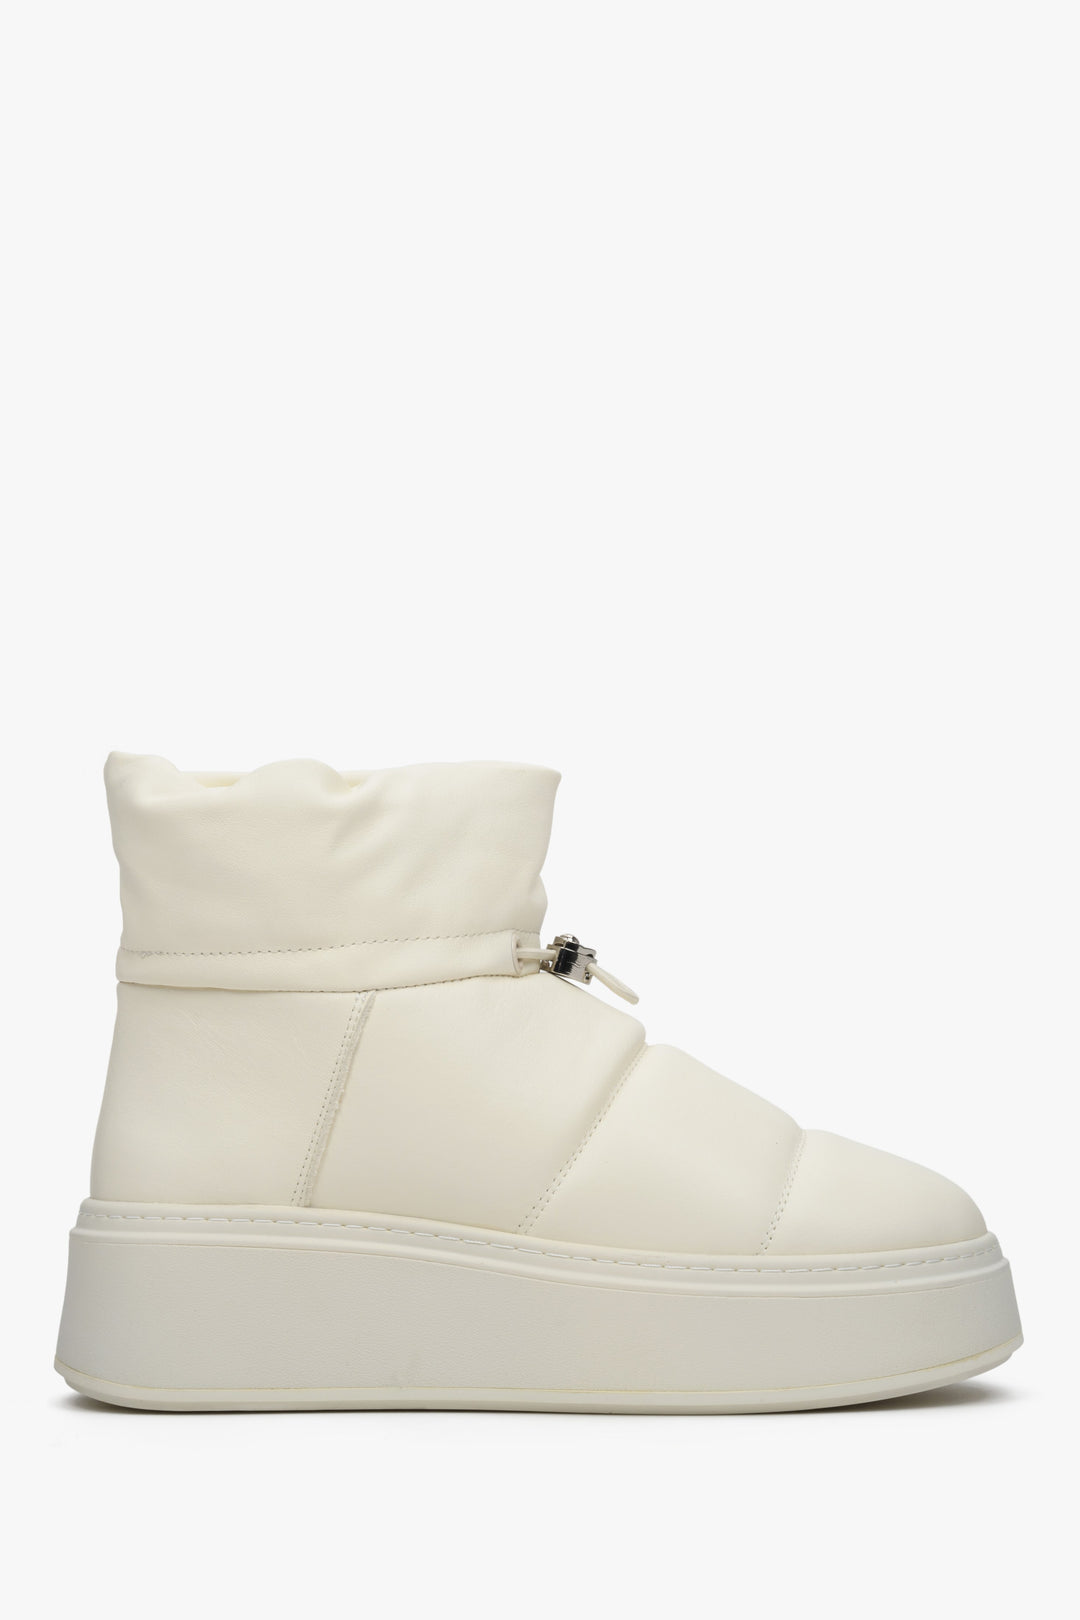 Women's White Snow Boots with a Turnbuckle Estro ER00112432.